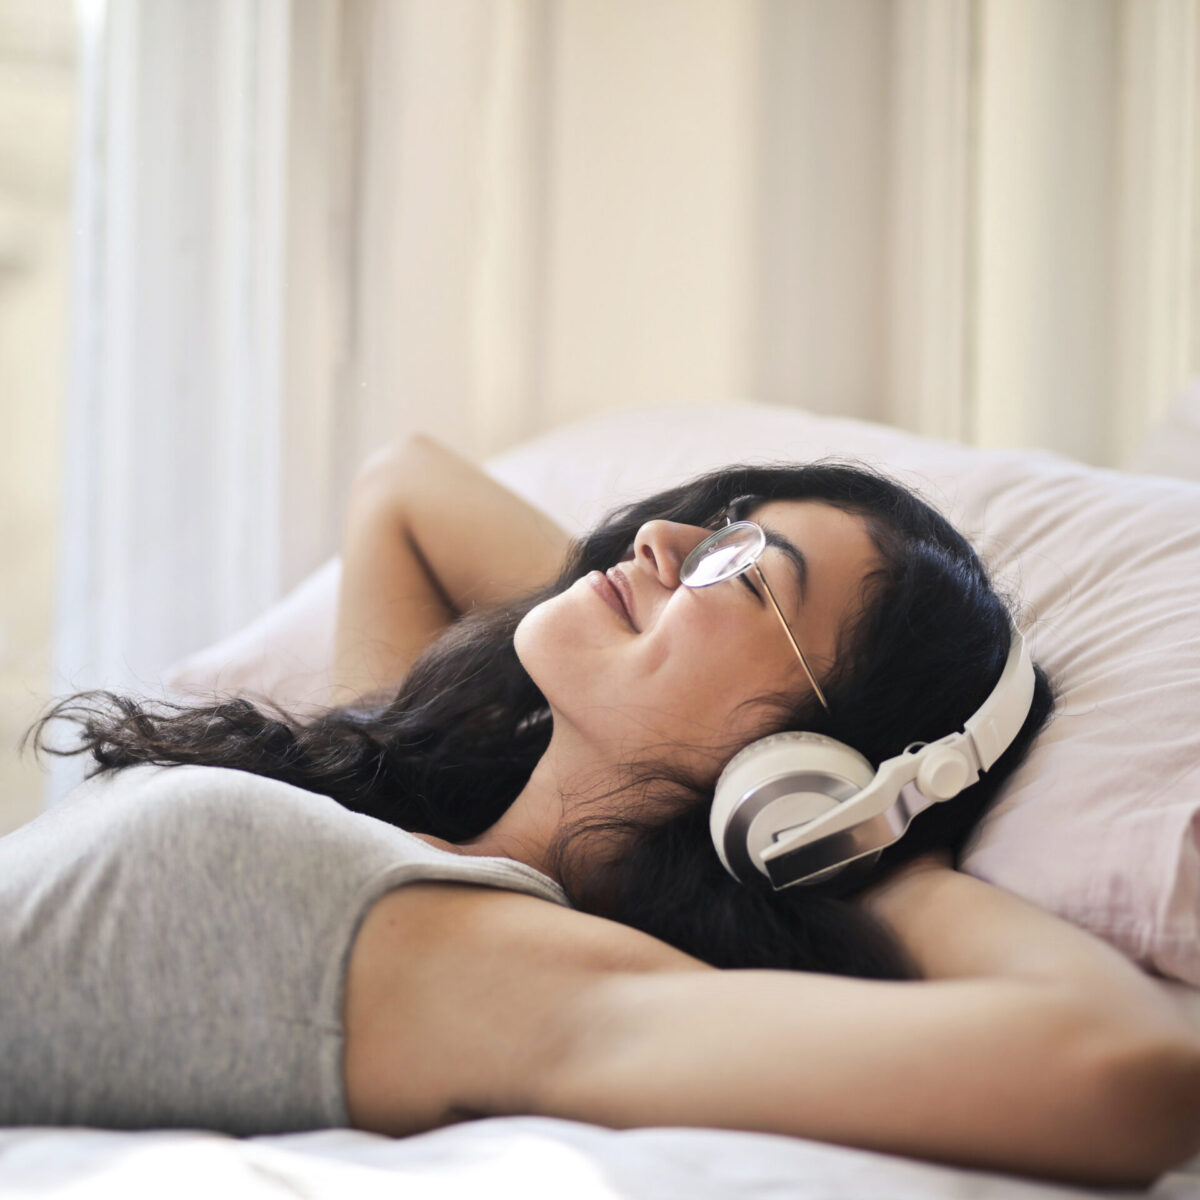 No Time to Read? Try Audiobooks